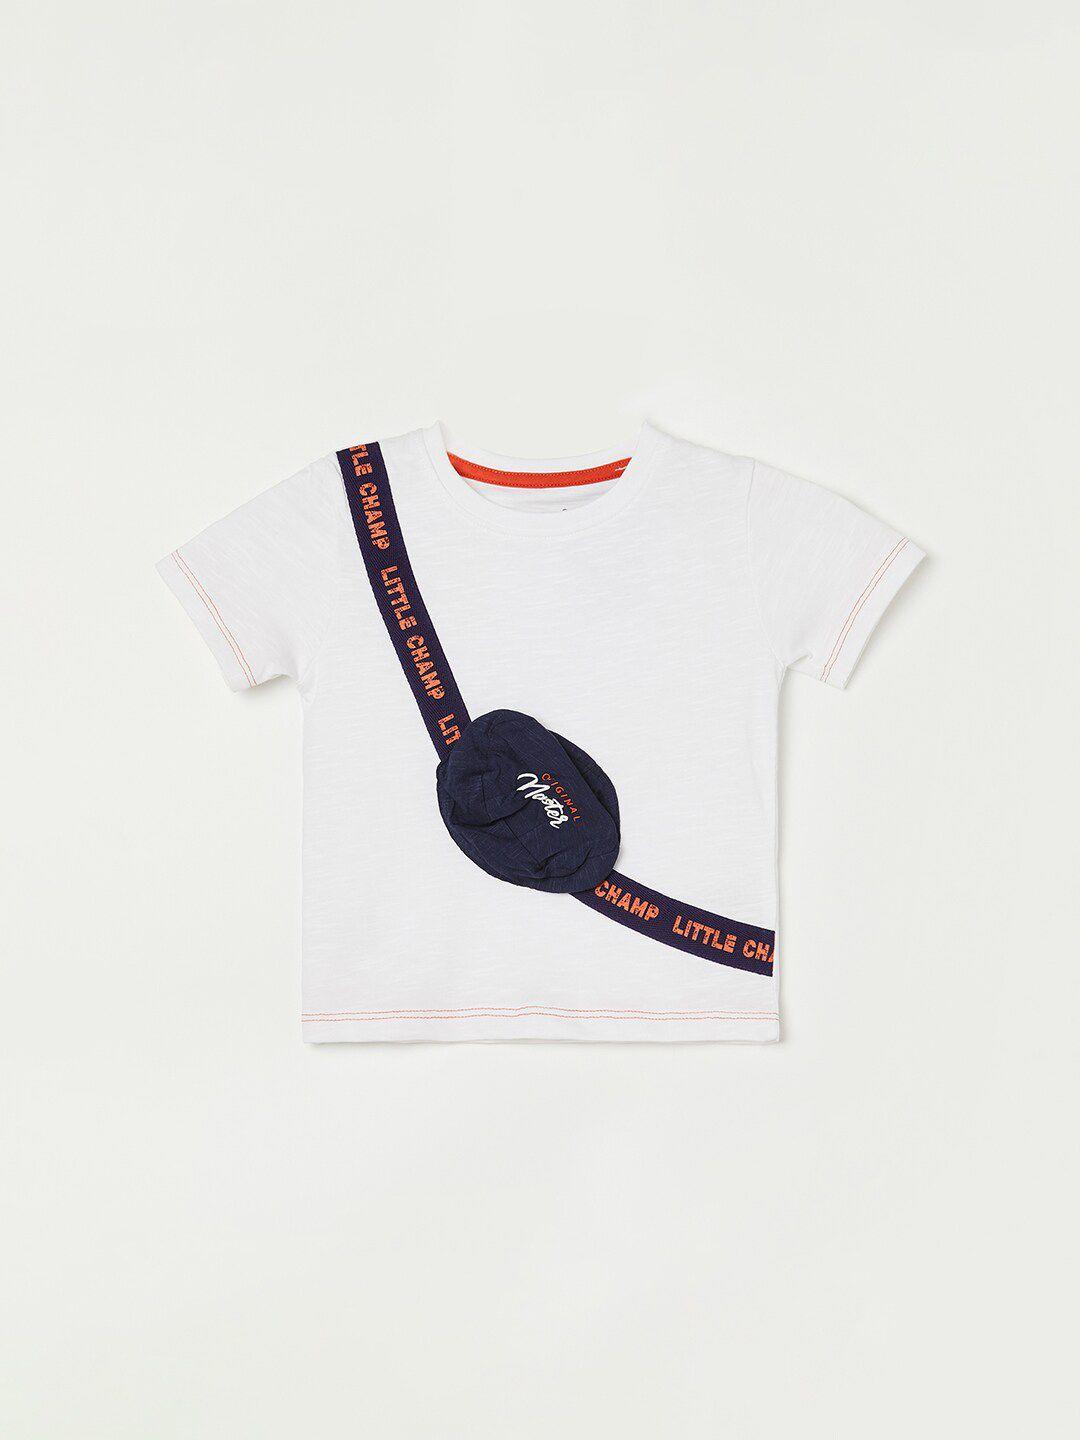 Juniors by Lifestyle Boys Typography Printed Cotton T-shirt